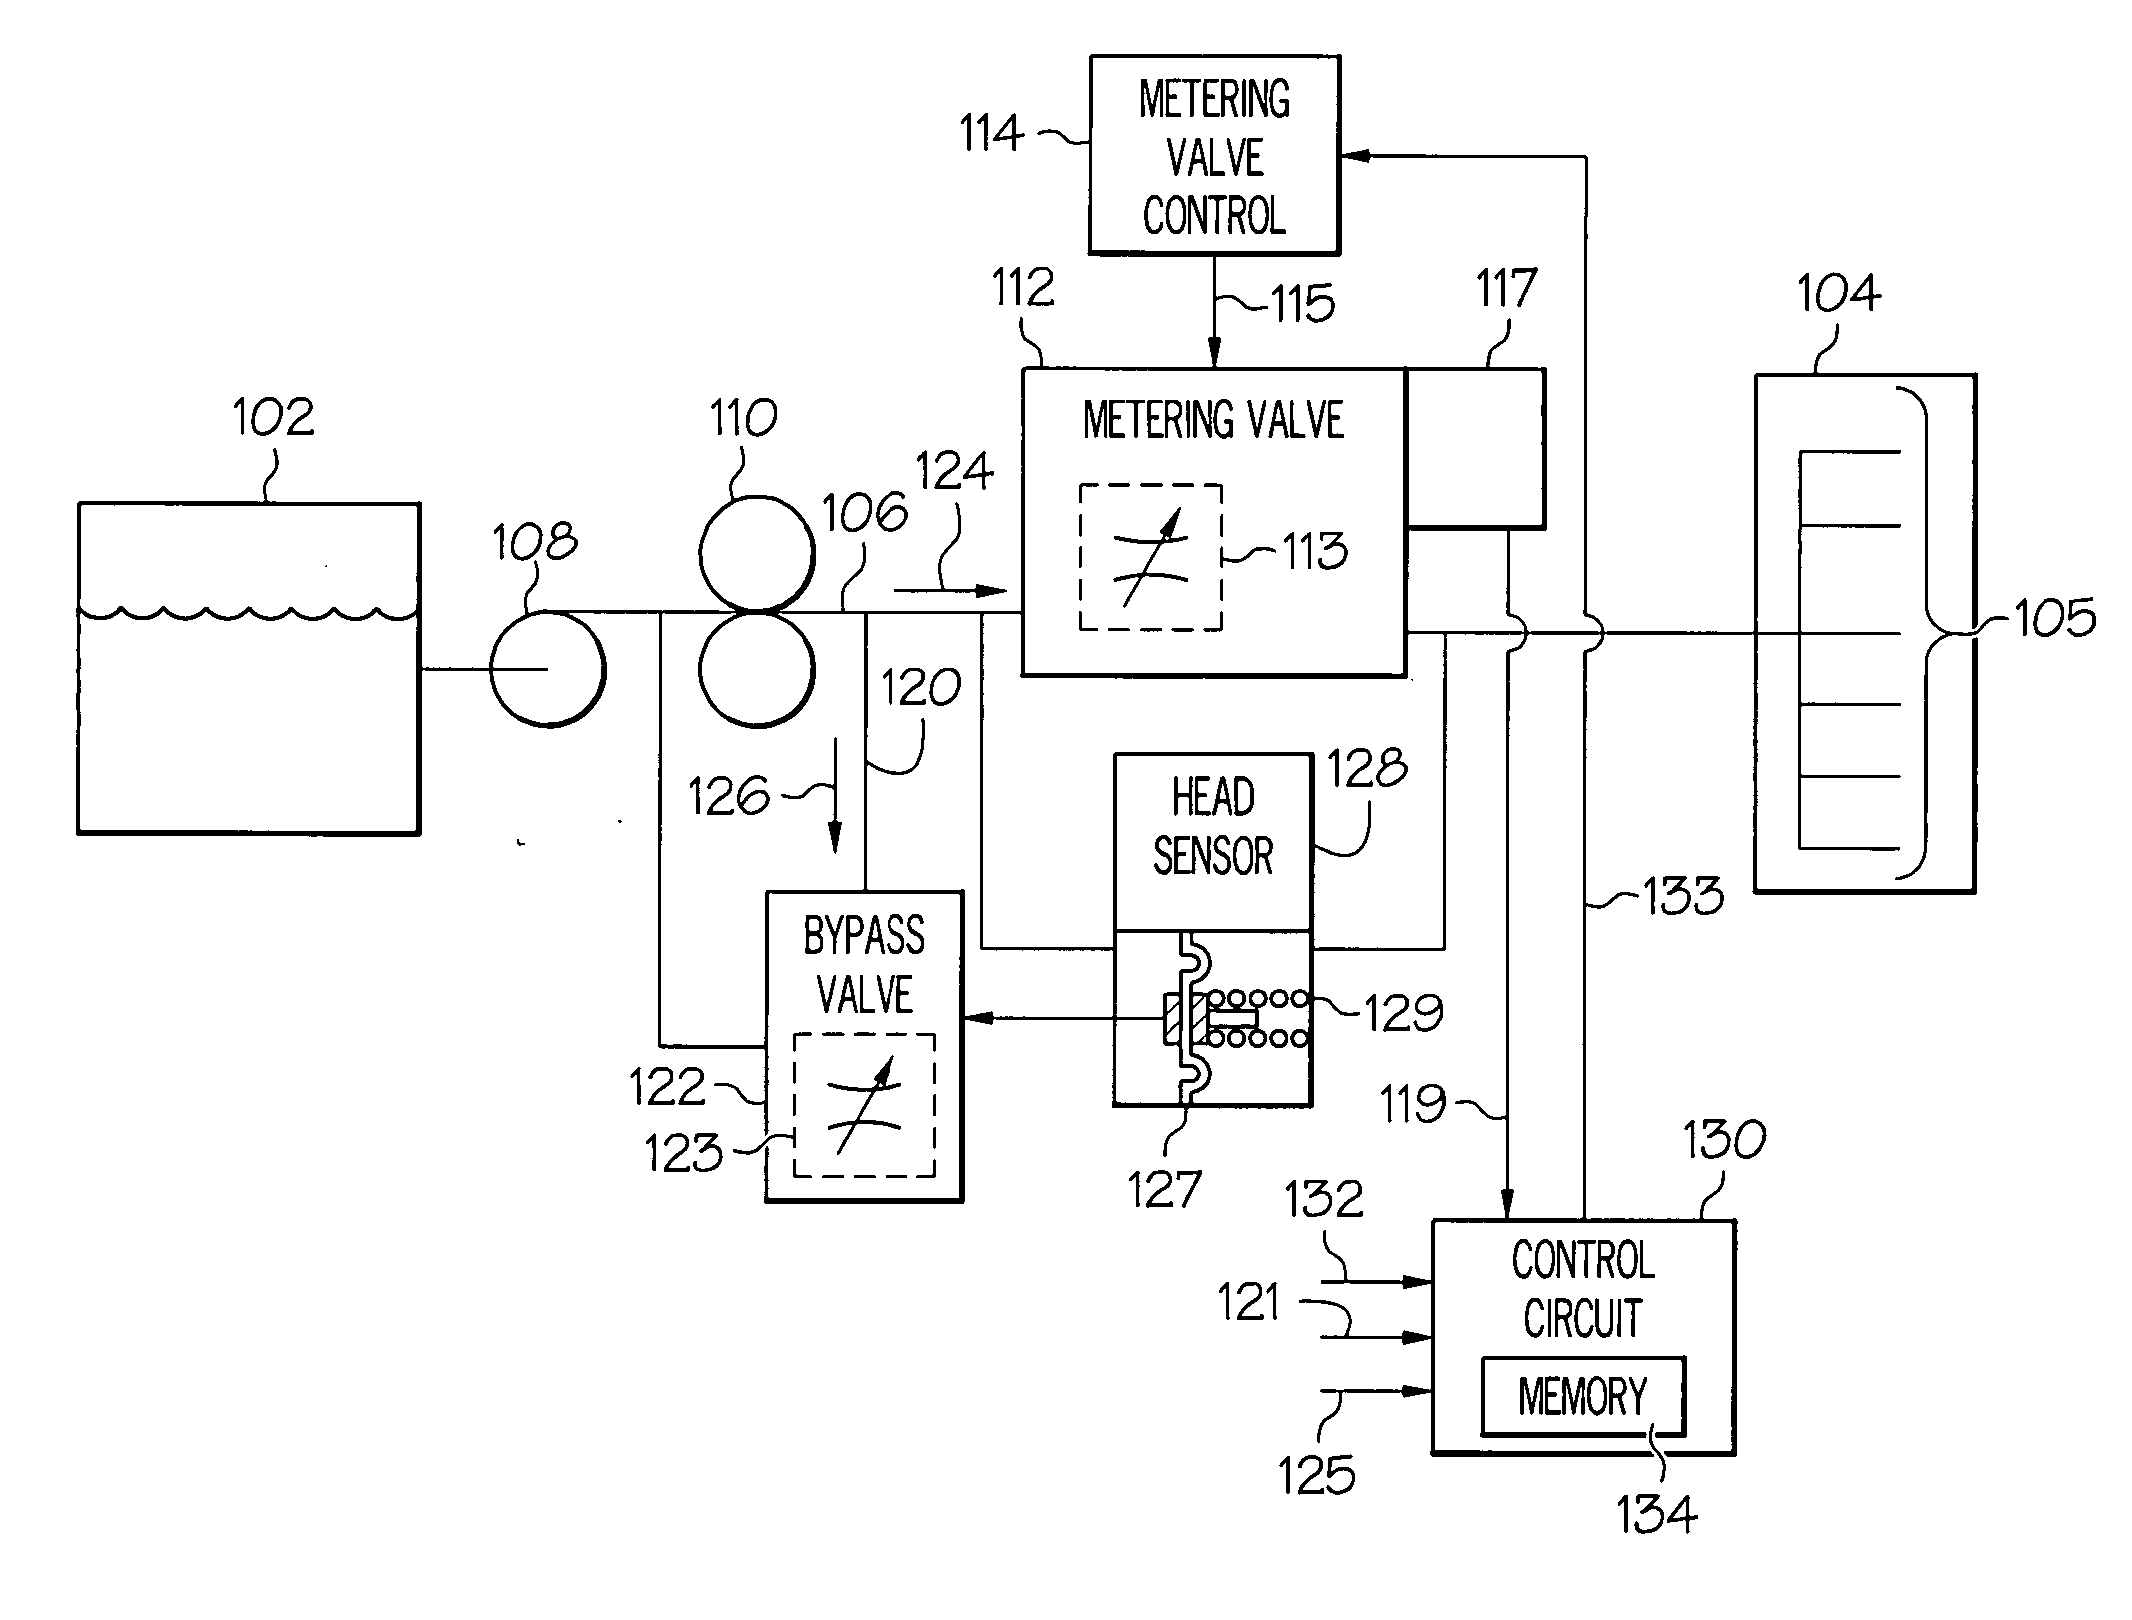 Fuel metering system proportional bypass valve error compensation system and method